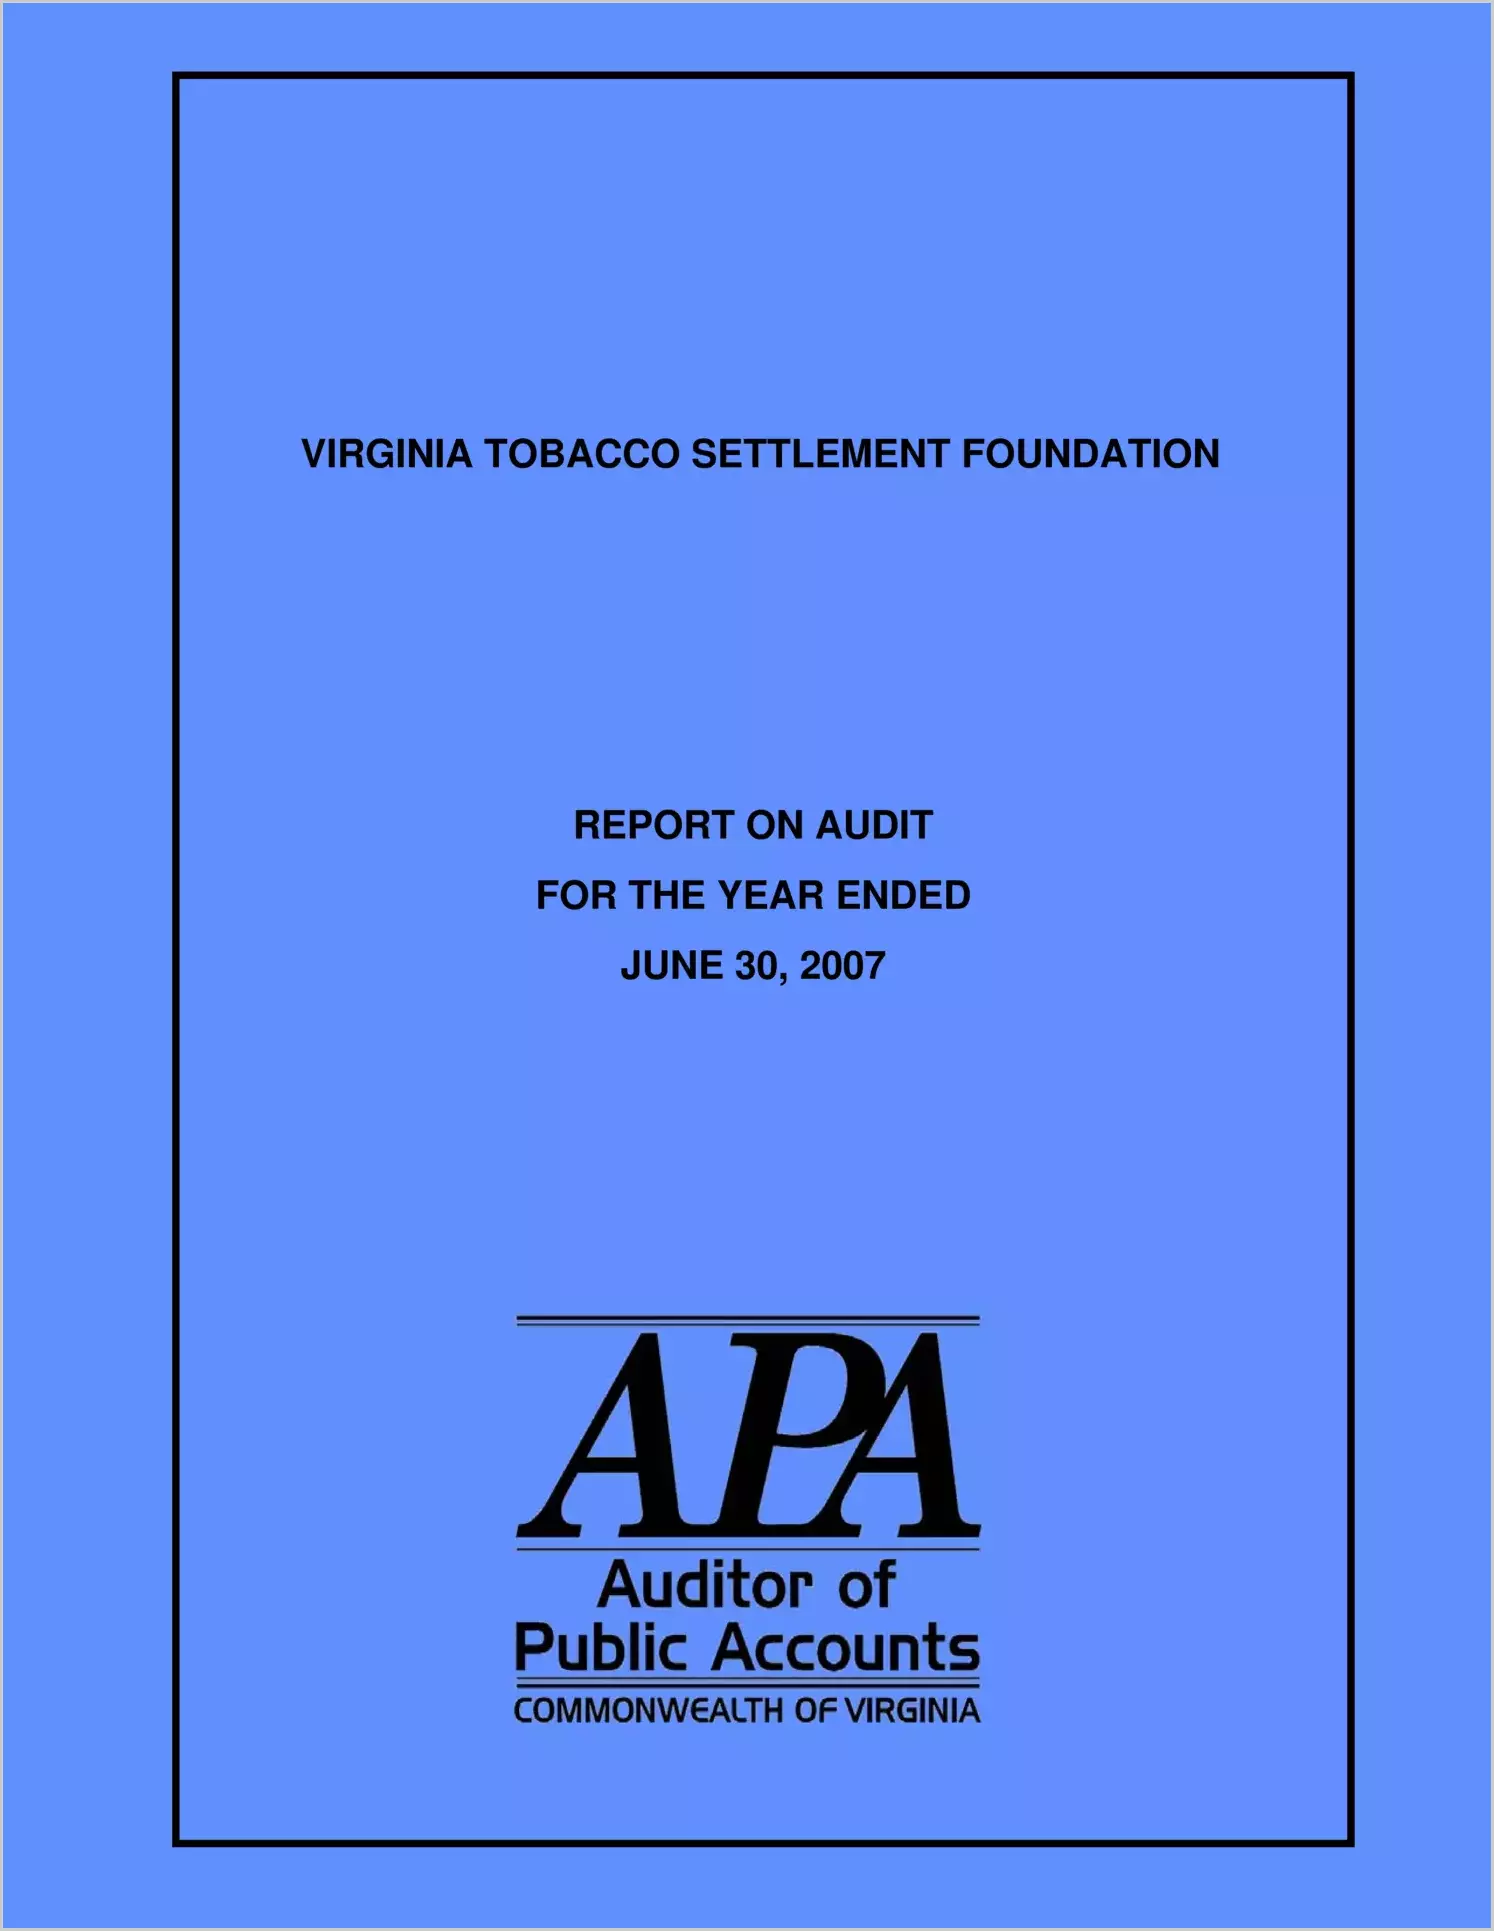 Virginia Tobacco Settlement Foundation for the year ended June 30, 2007